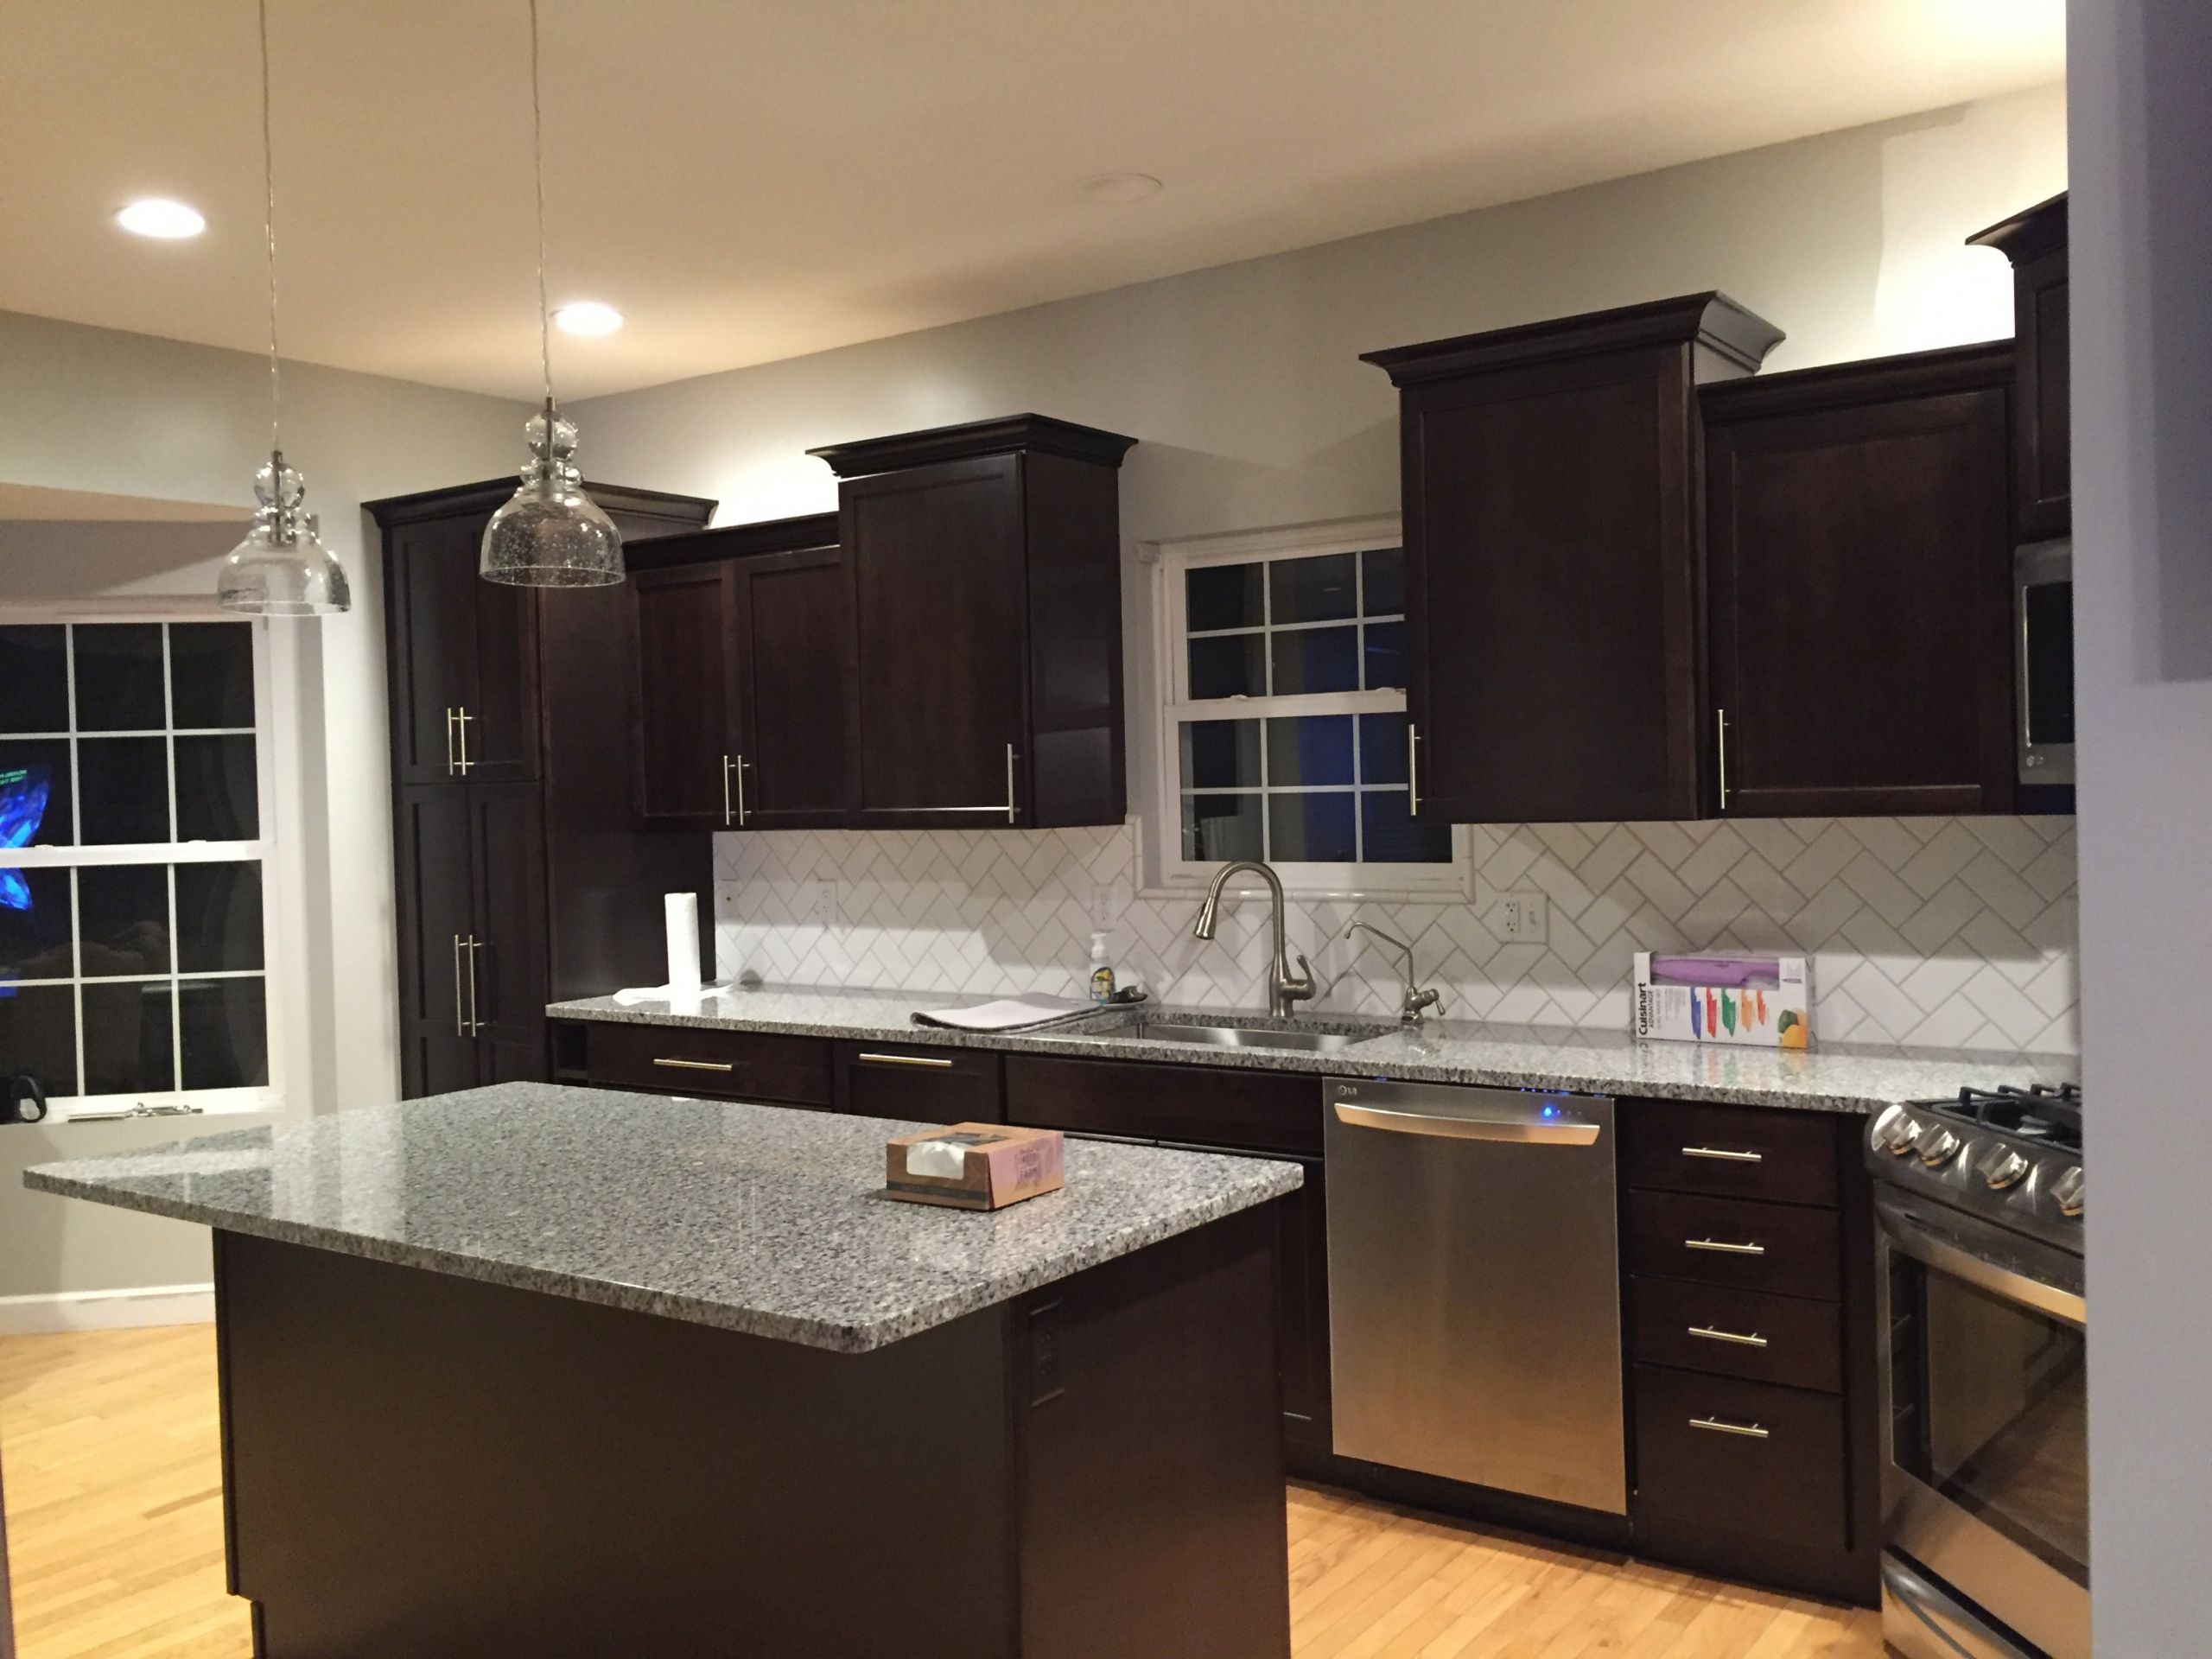 Kitchen Cabinet Rankings
 Kraftmaid Cabinets Reviews Lowes